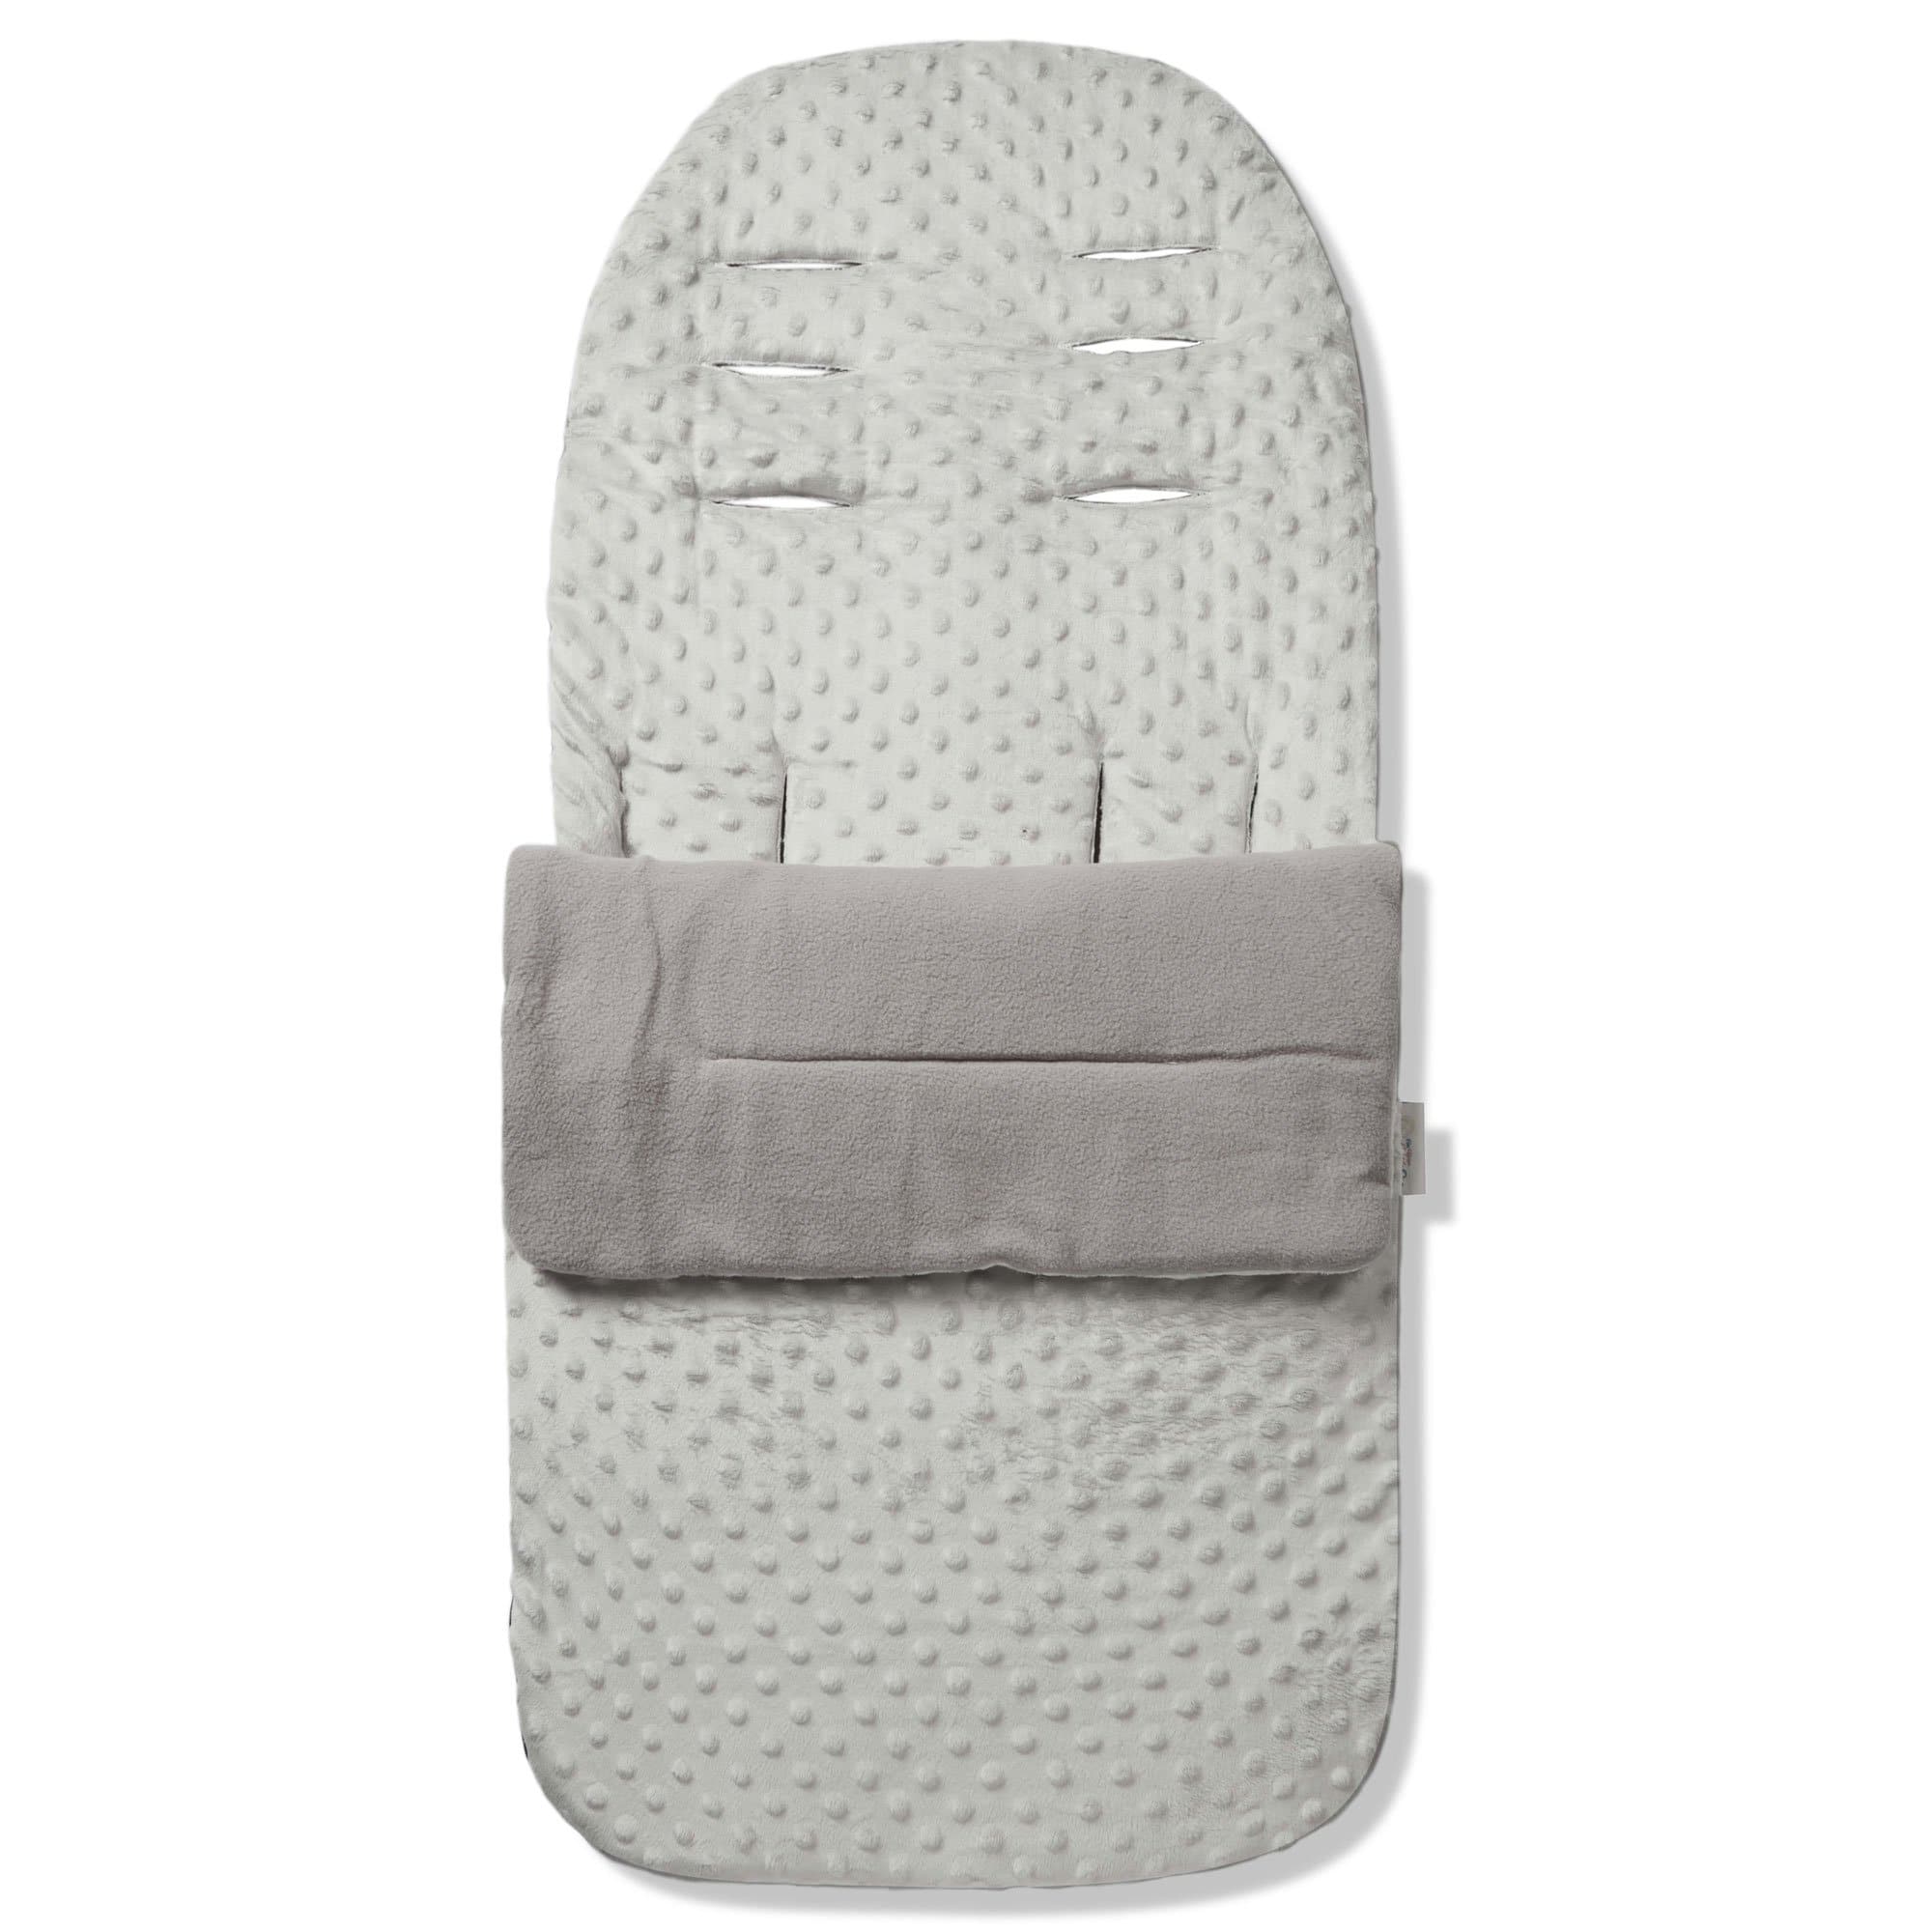 Dimple Footmuff / Cosy Toes Compatible with Petite Star - Grey / Fits All Models | For Your Little One